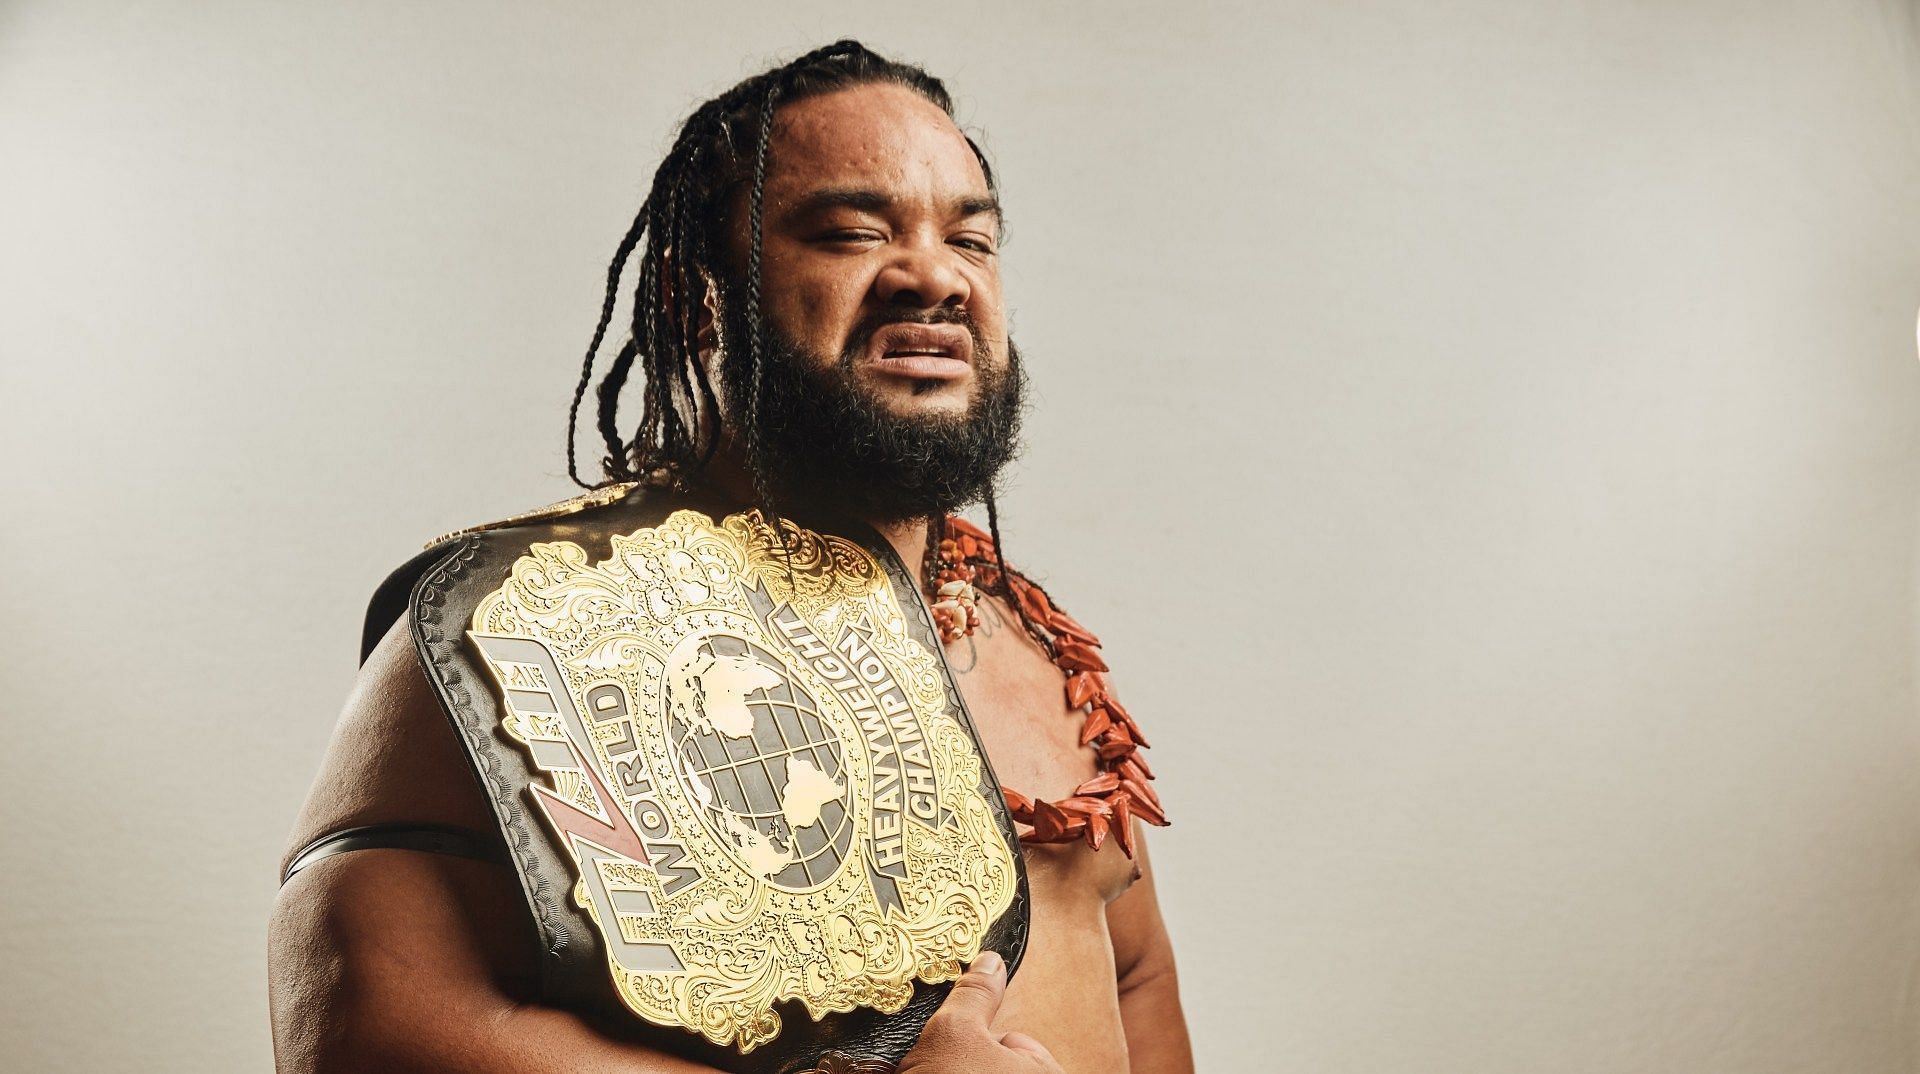 Jacob Fatu is currently signed with Major League Wrestling (MLW)